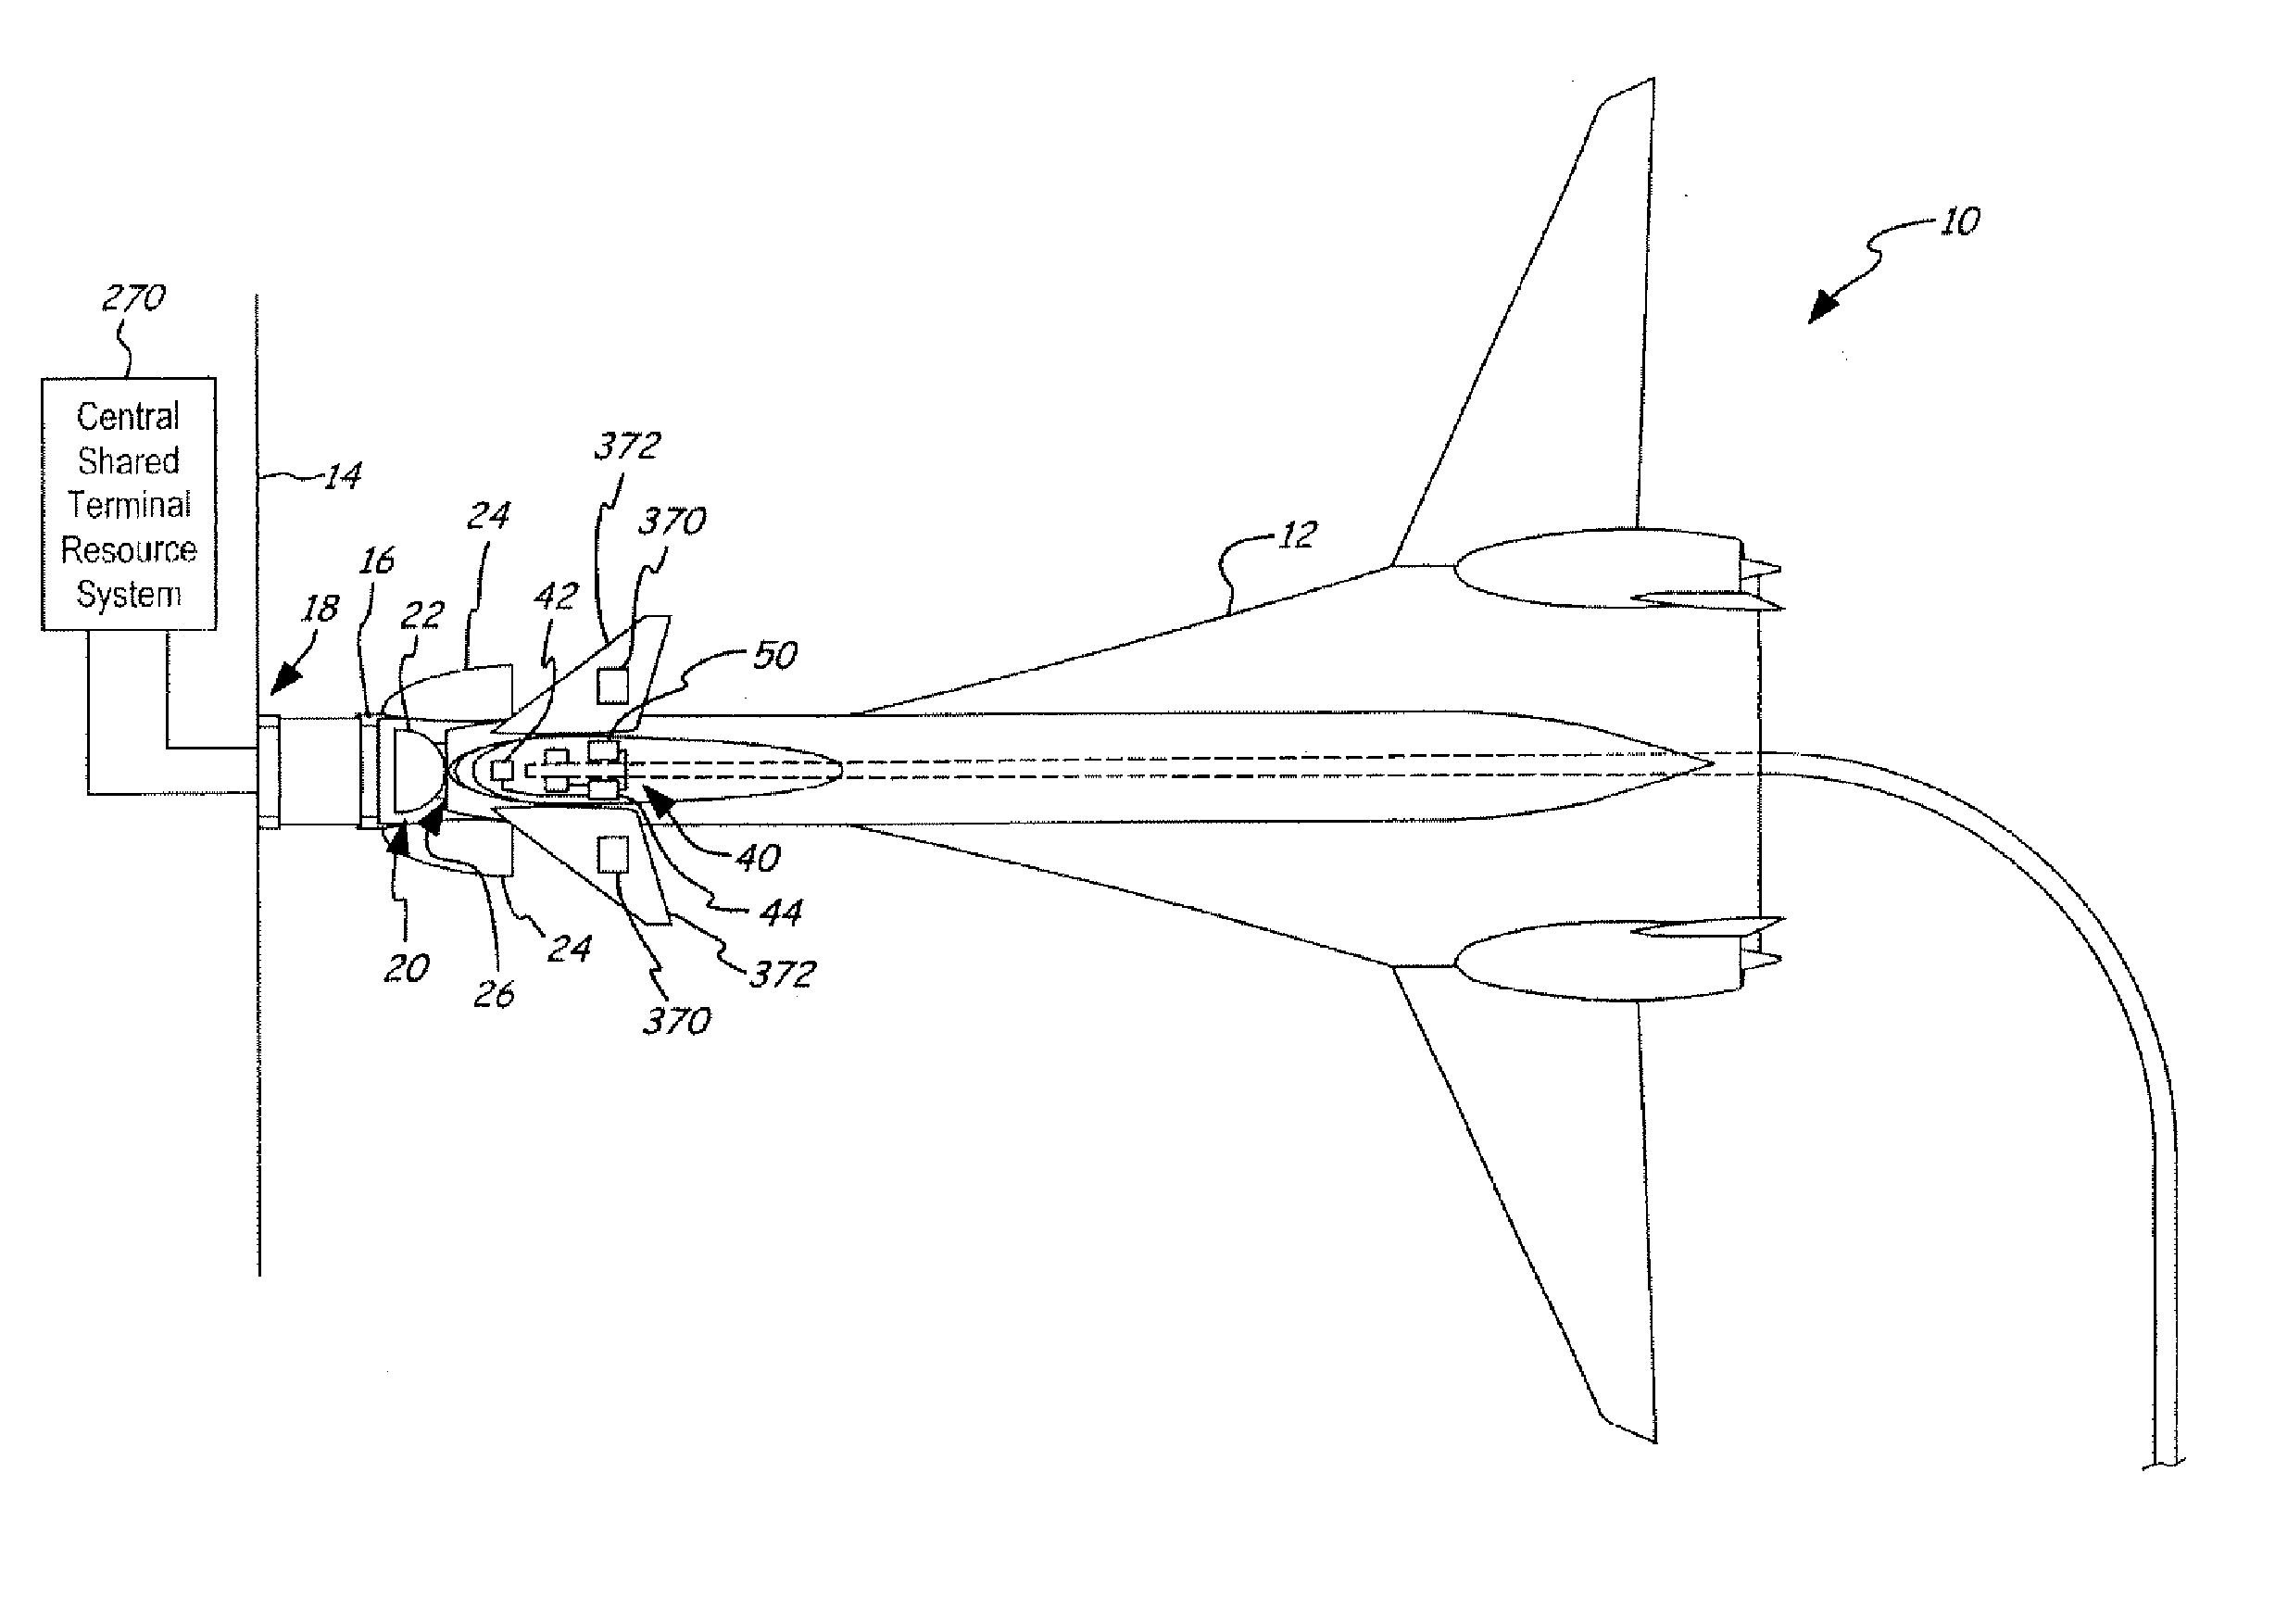 Terminal docking port for an operational ground support system